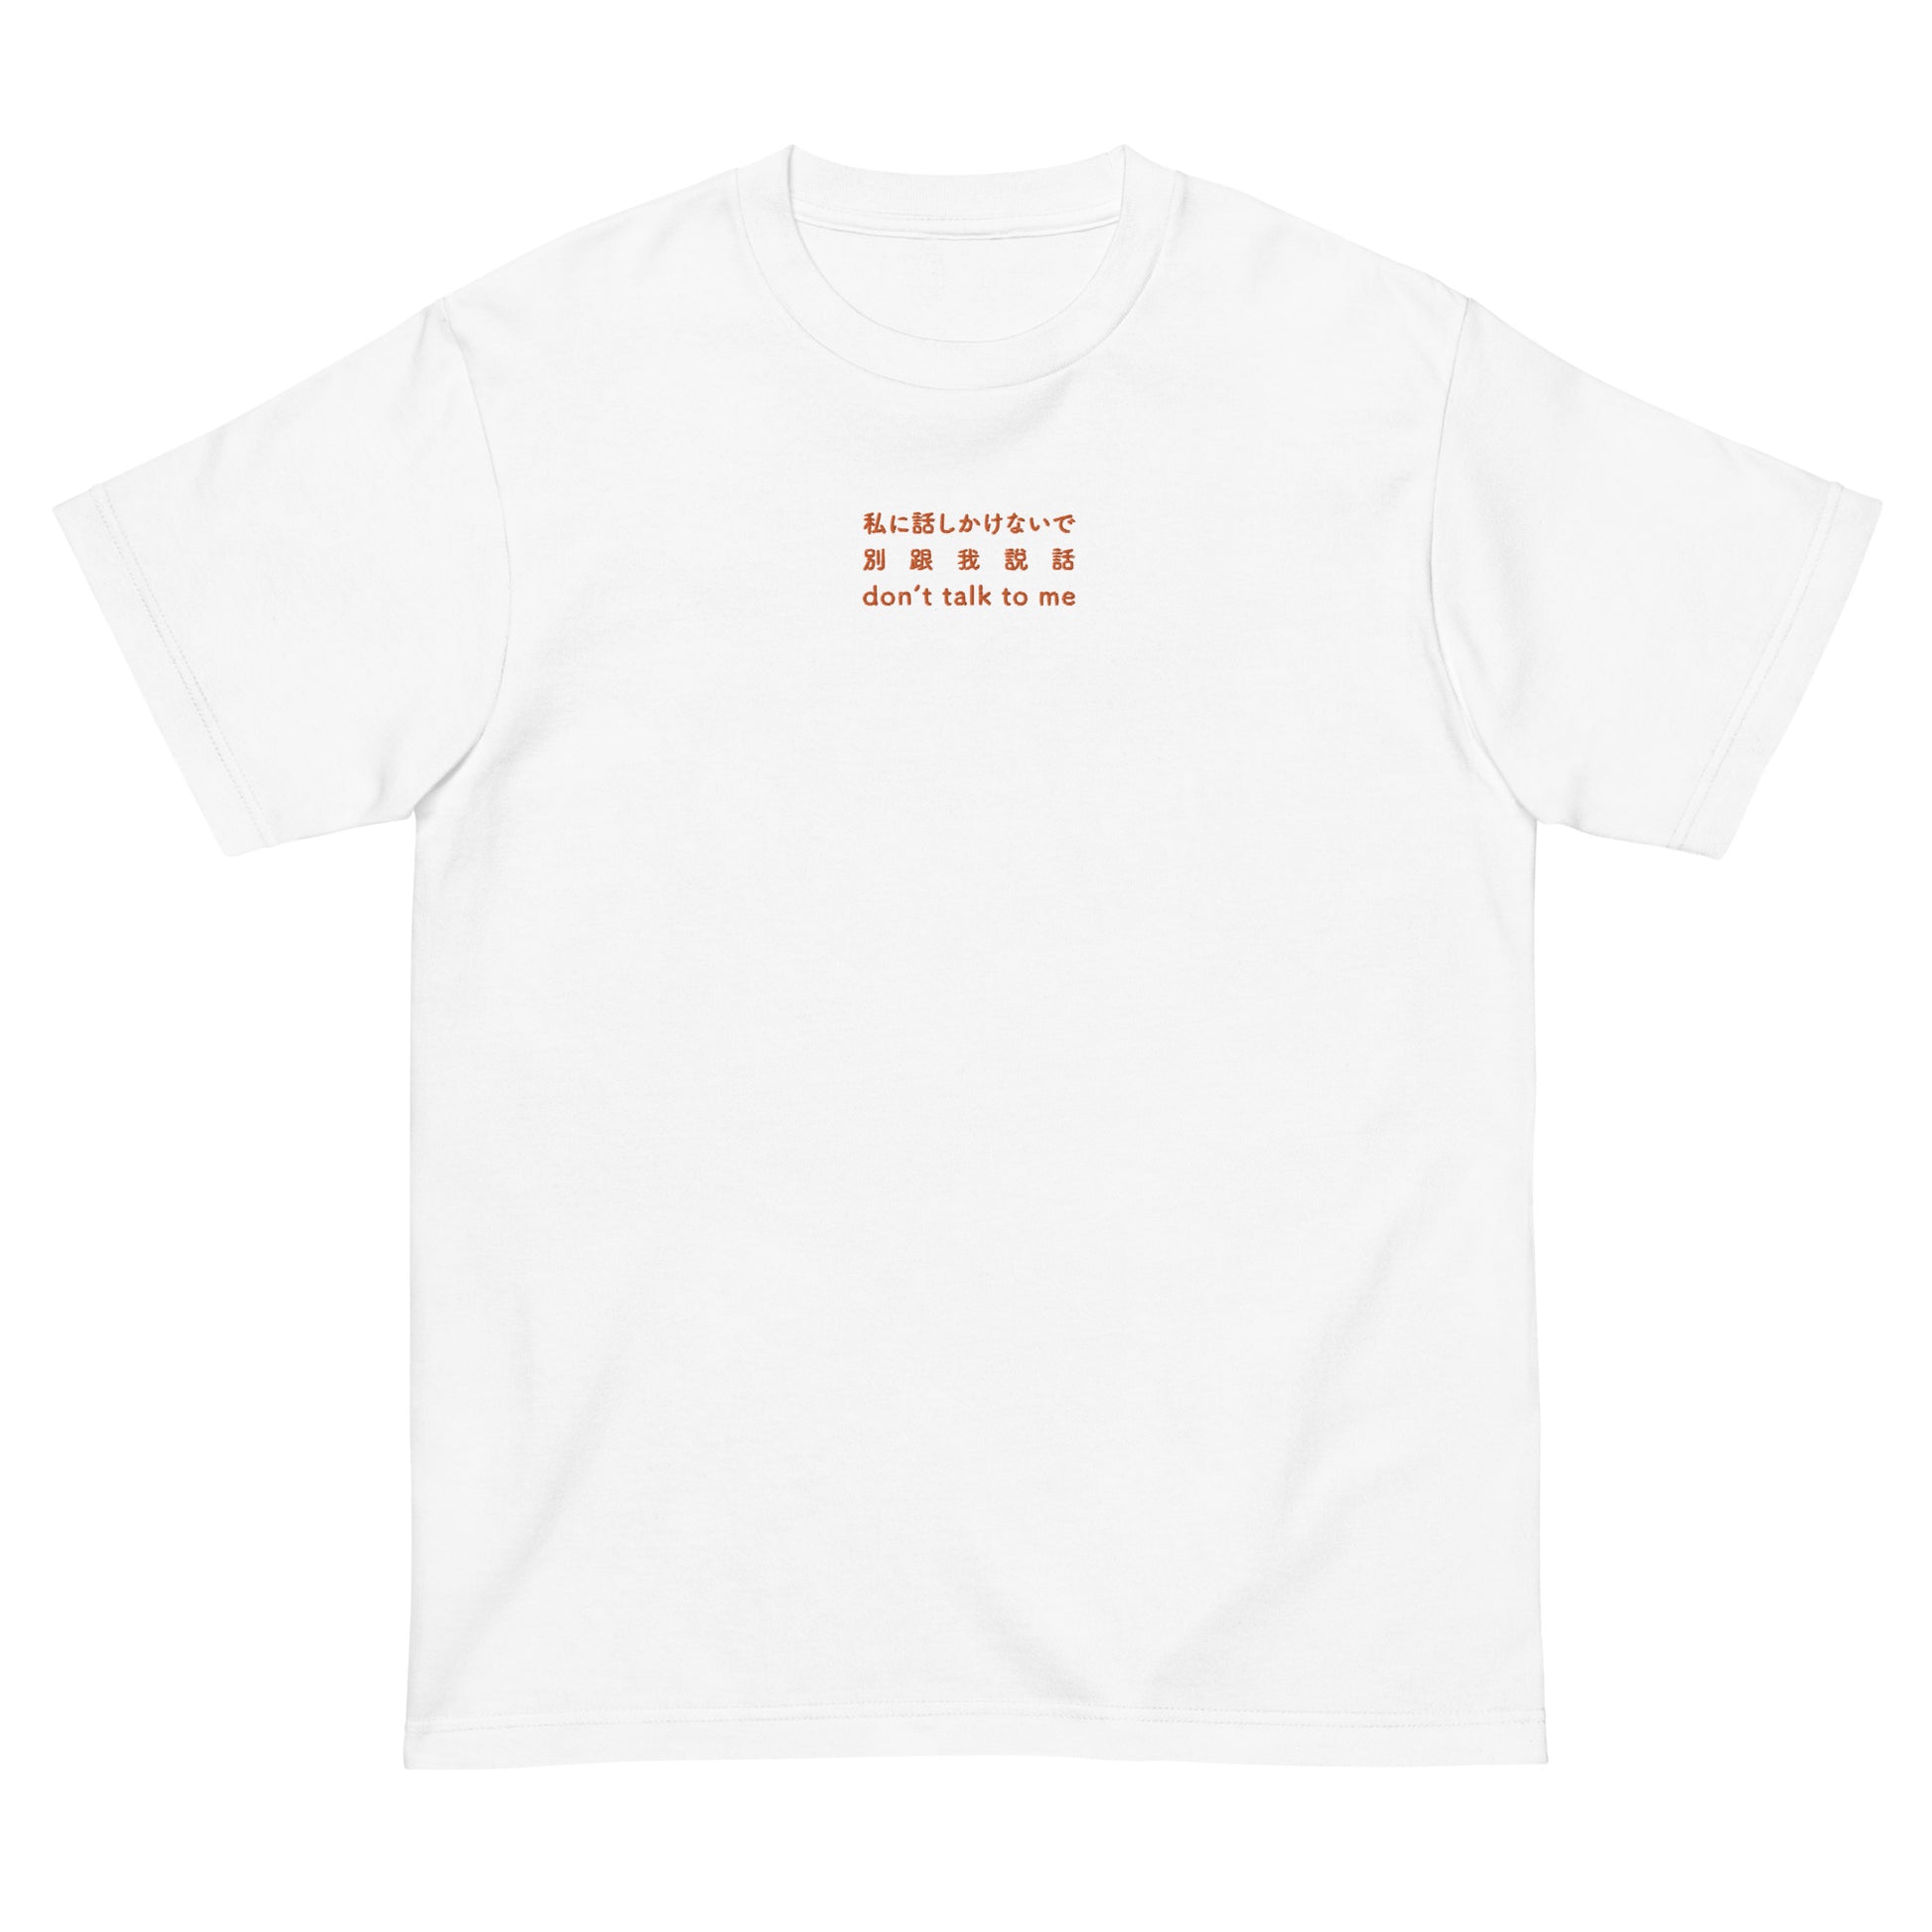 White High Quality Tee - Front Design with an Orange Embroidery "don't talk to me" in Japanese,Chinese and English